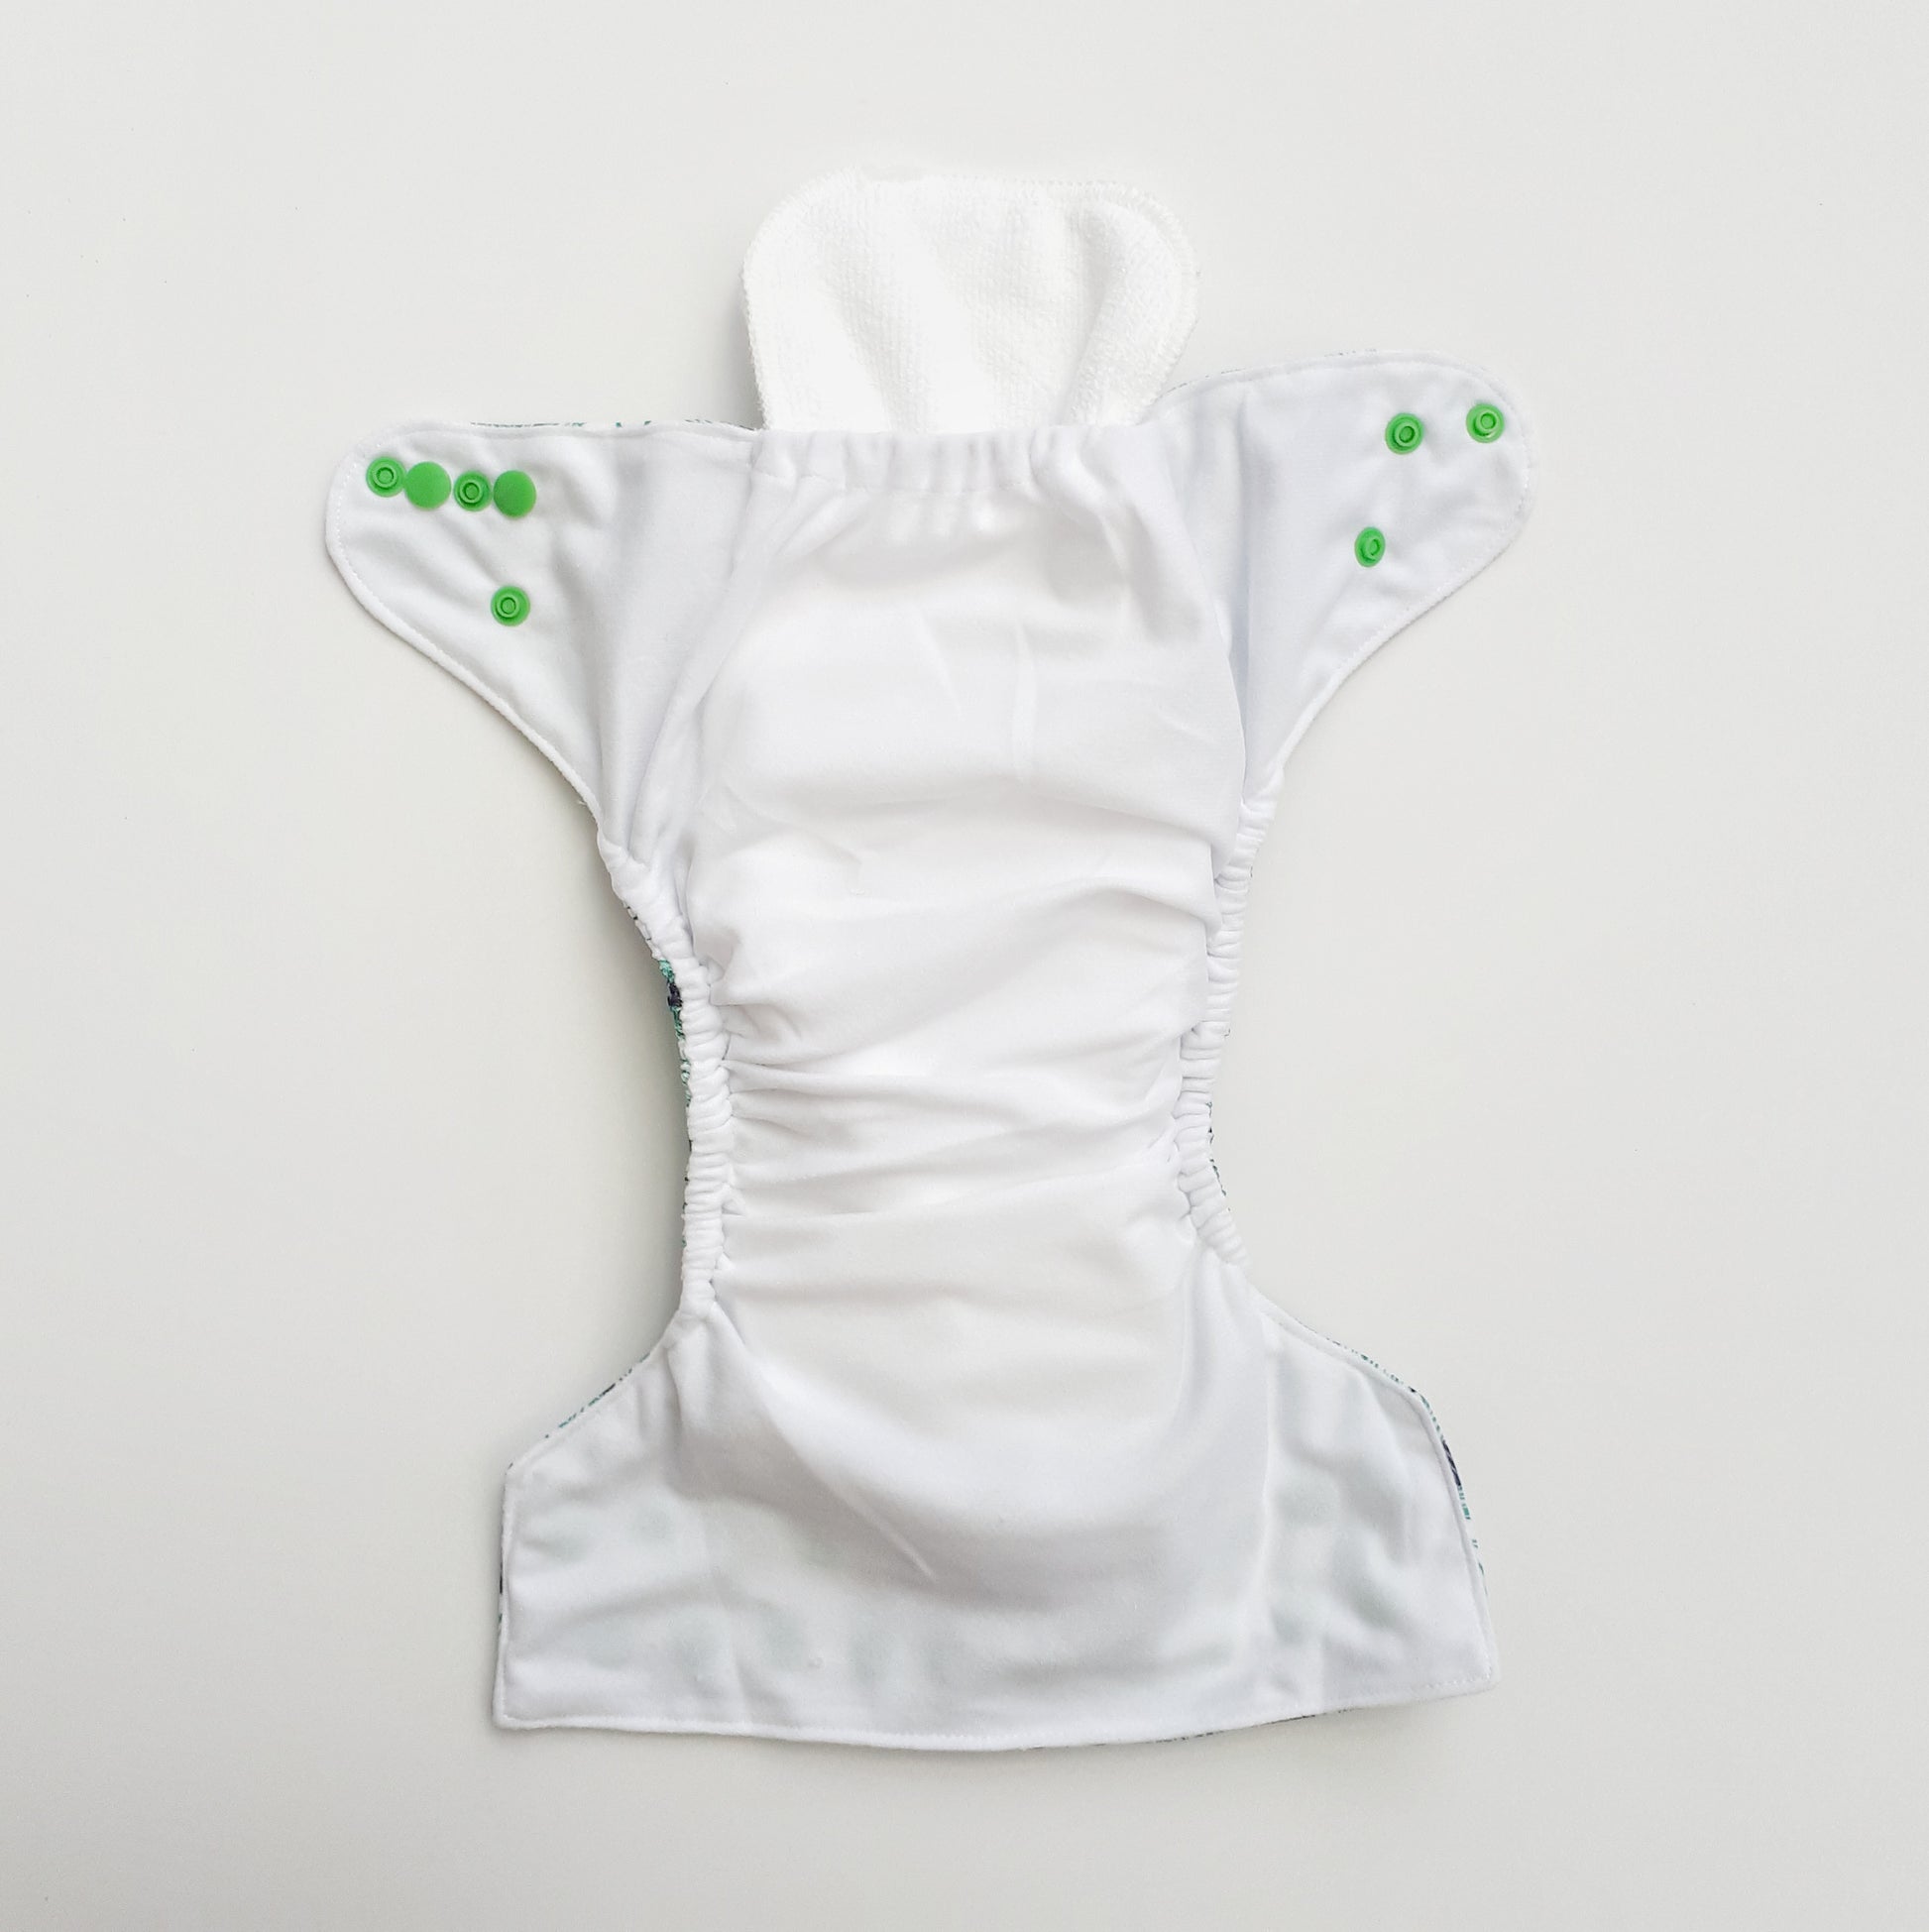 One Size Fits Most Reusable Cloth Nappy in Suede Cloth Fabric from Bear & Moo